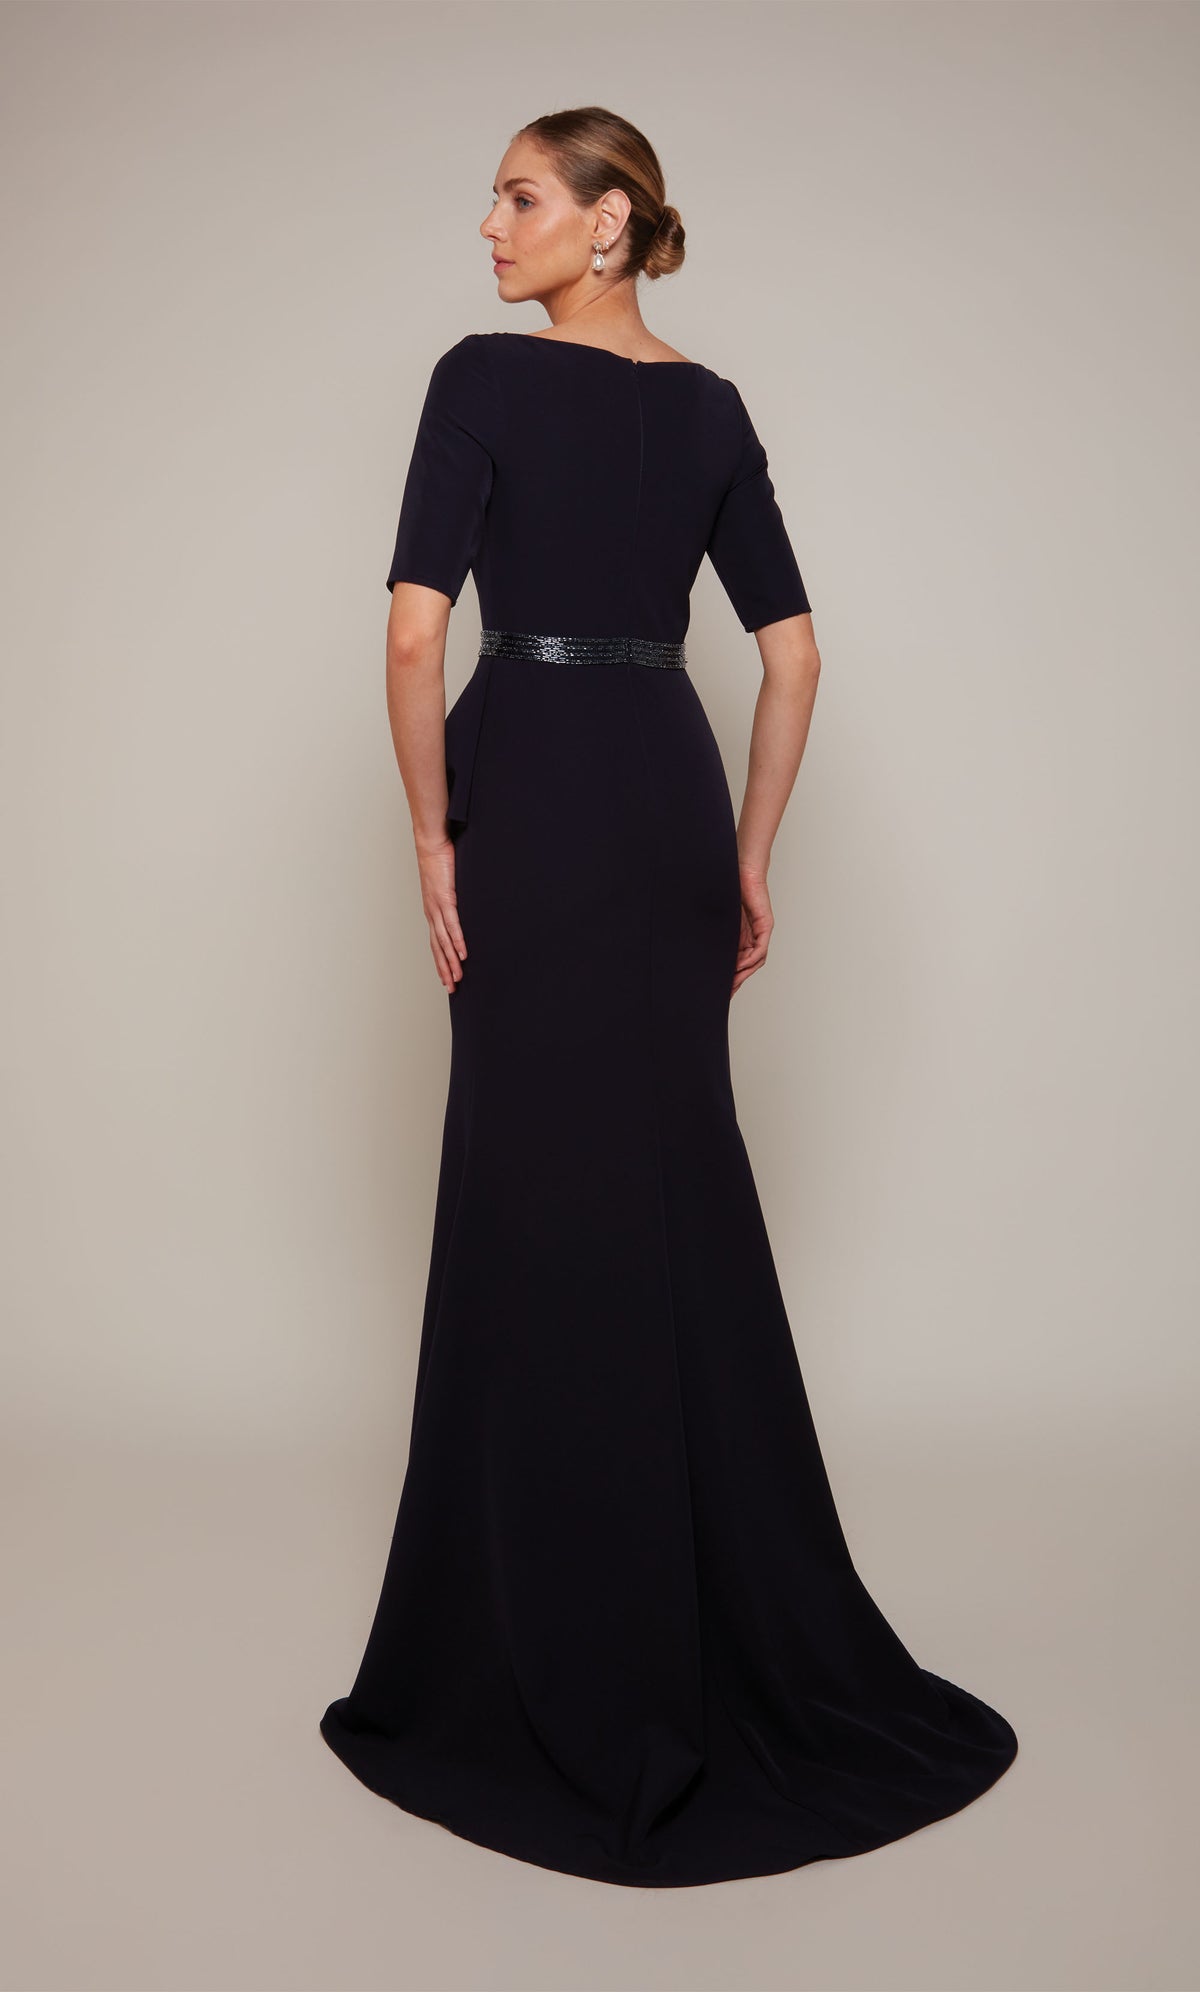 A navy scooped neck designer gown with short sleeves, a closed, zip up back, a beaded waistline, and a train.